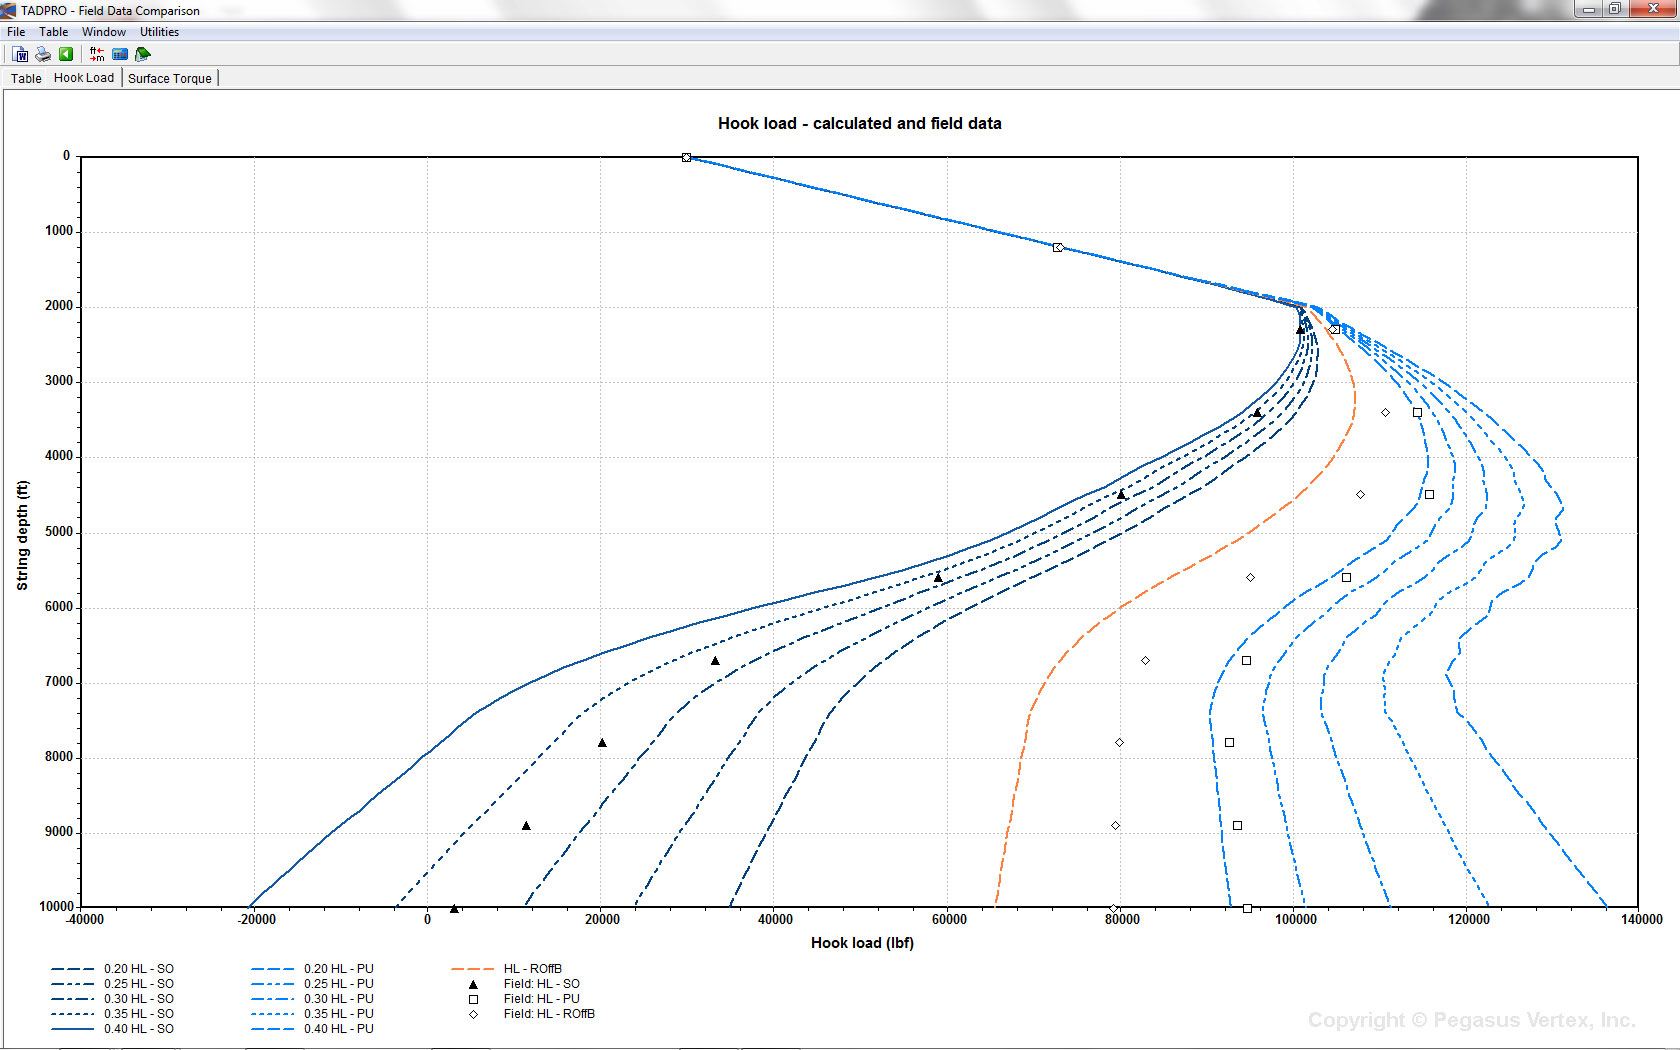 Hook Load Prediction Using TADPRO (torque and drag model). 